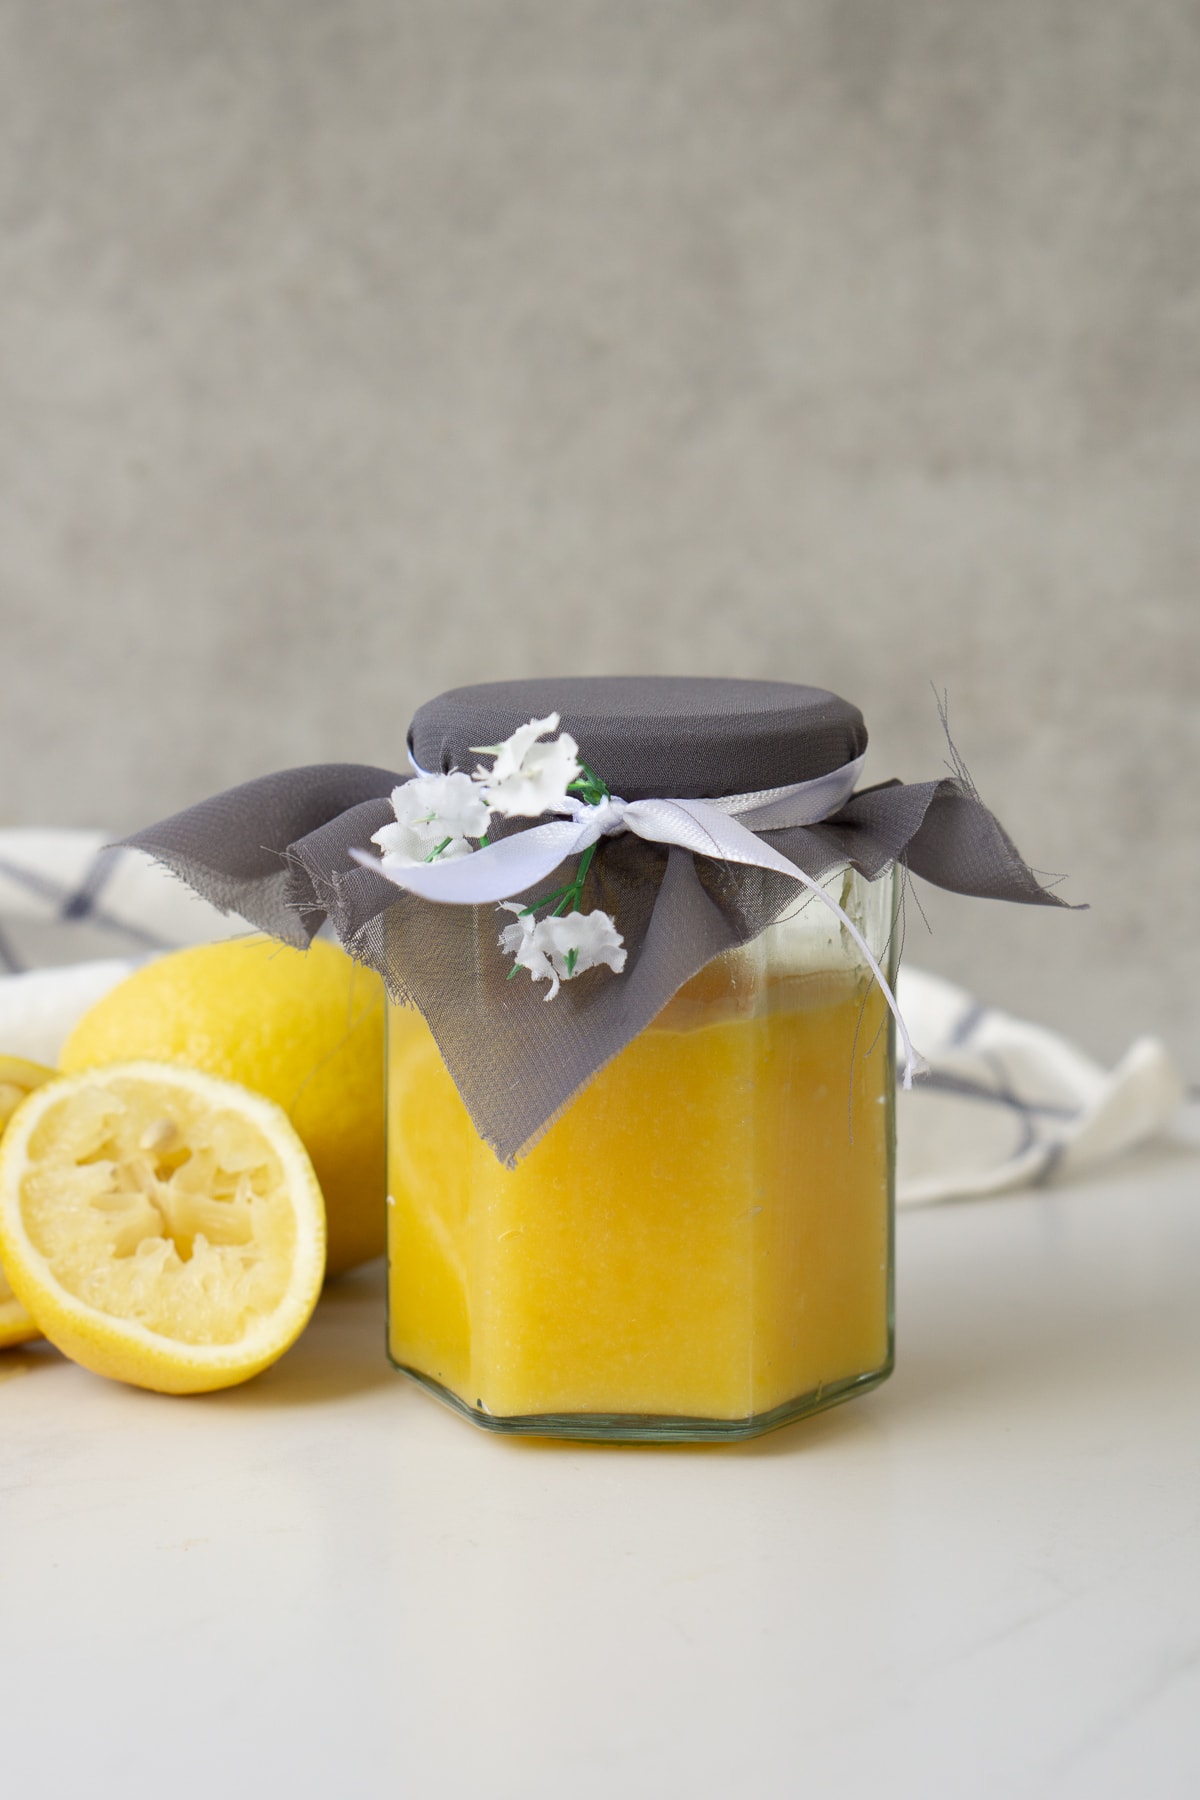 Lemon Butter wrapped up as a gift